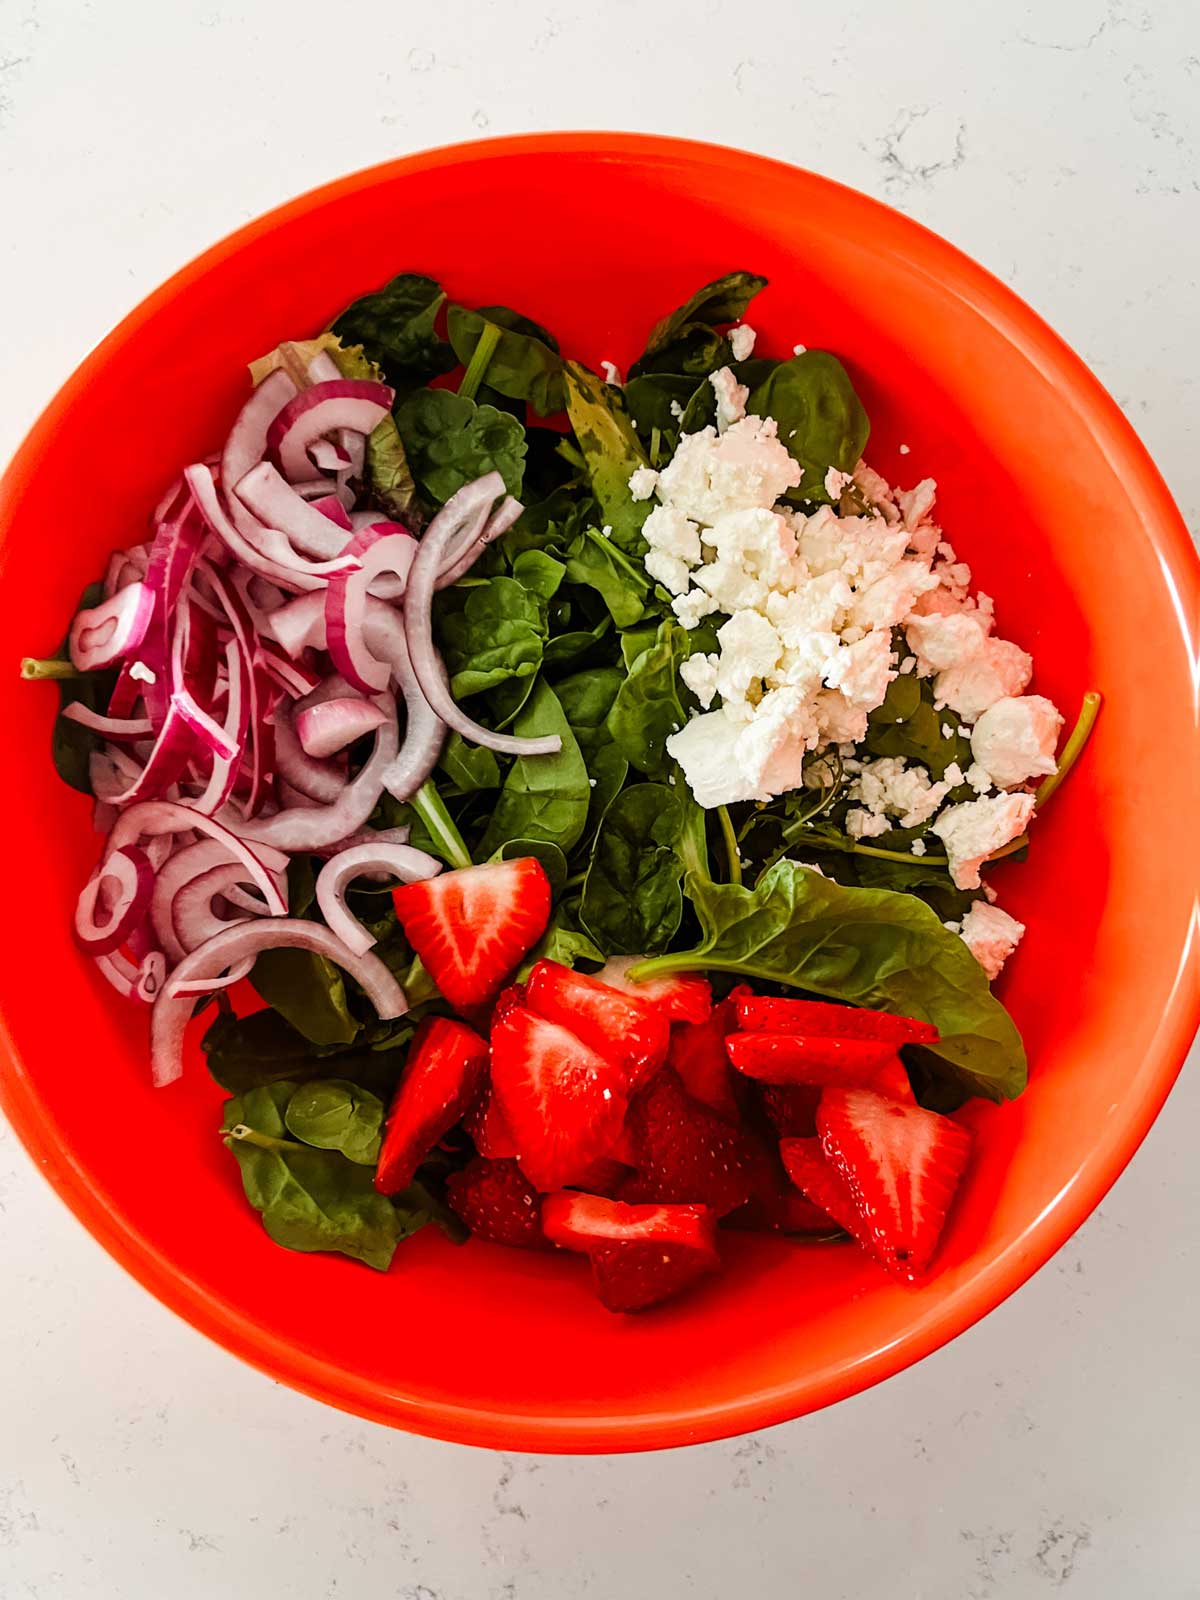 A large orange bowl with baby greens, goat cheese, red onion, and strawberries.